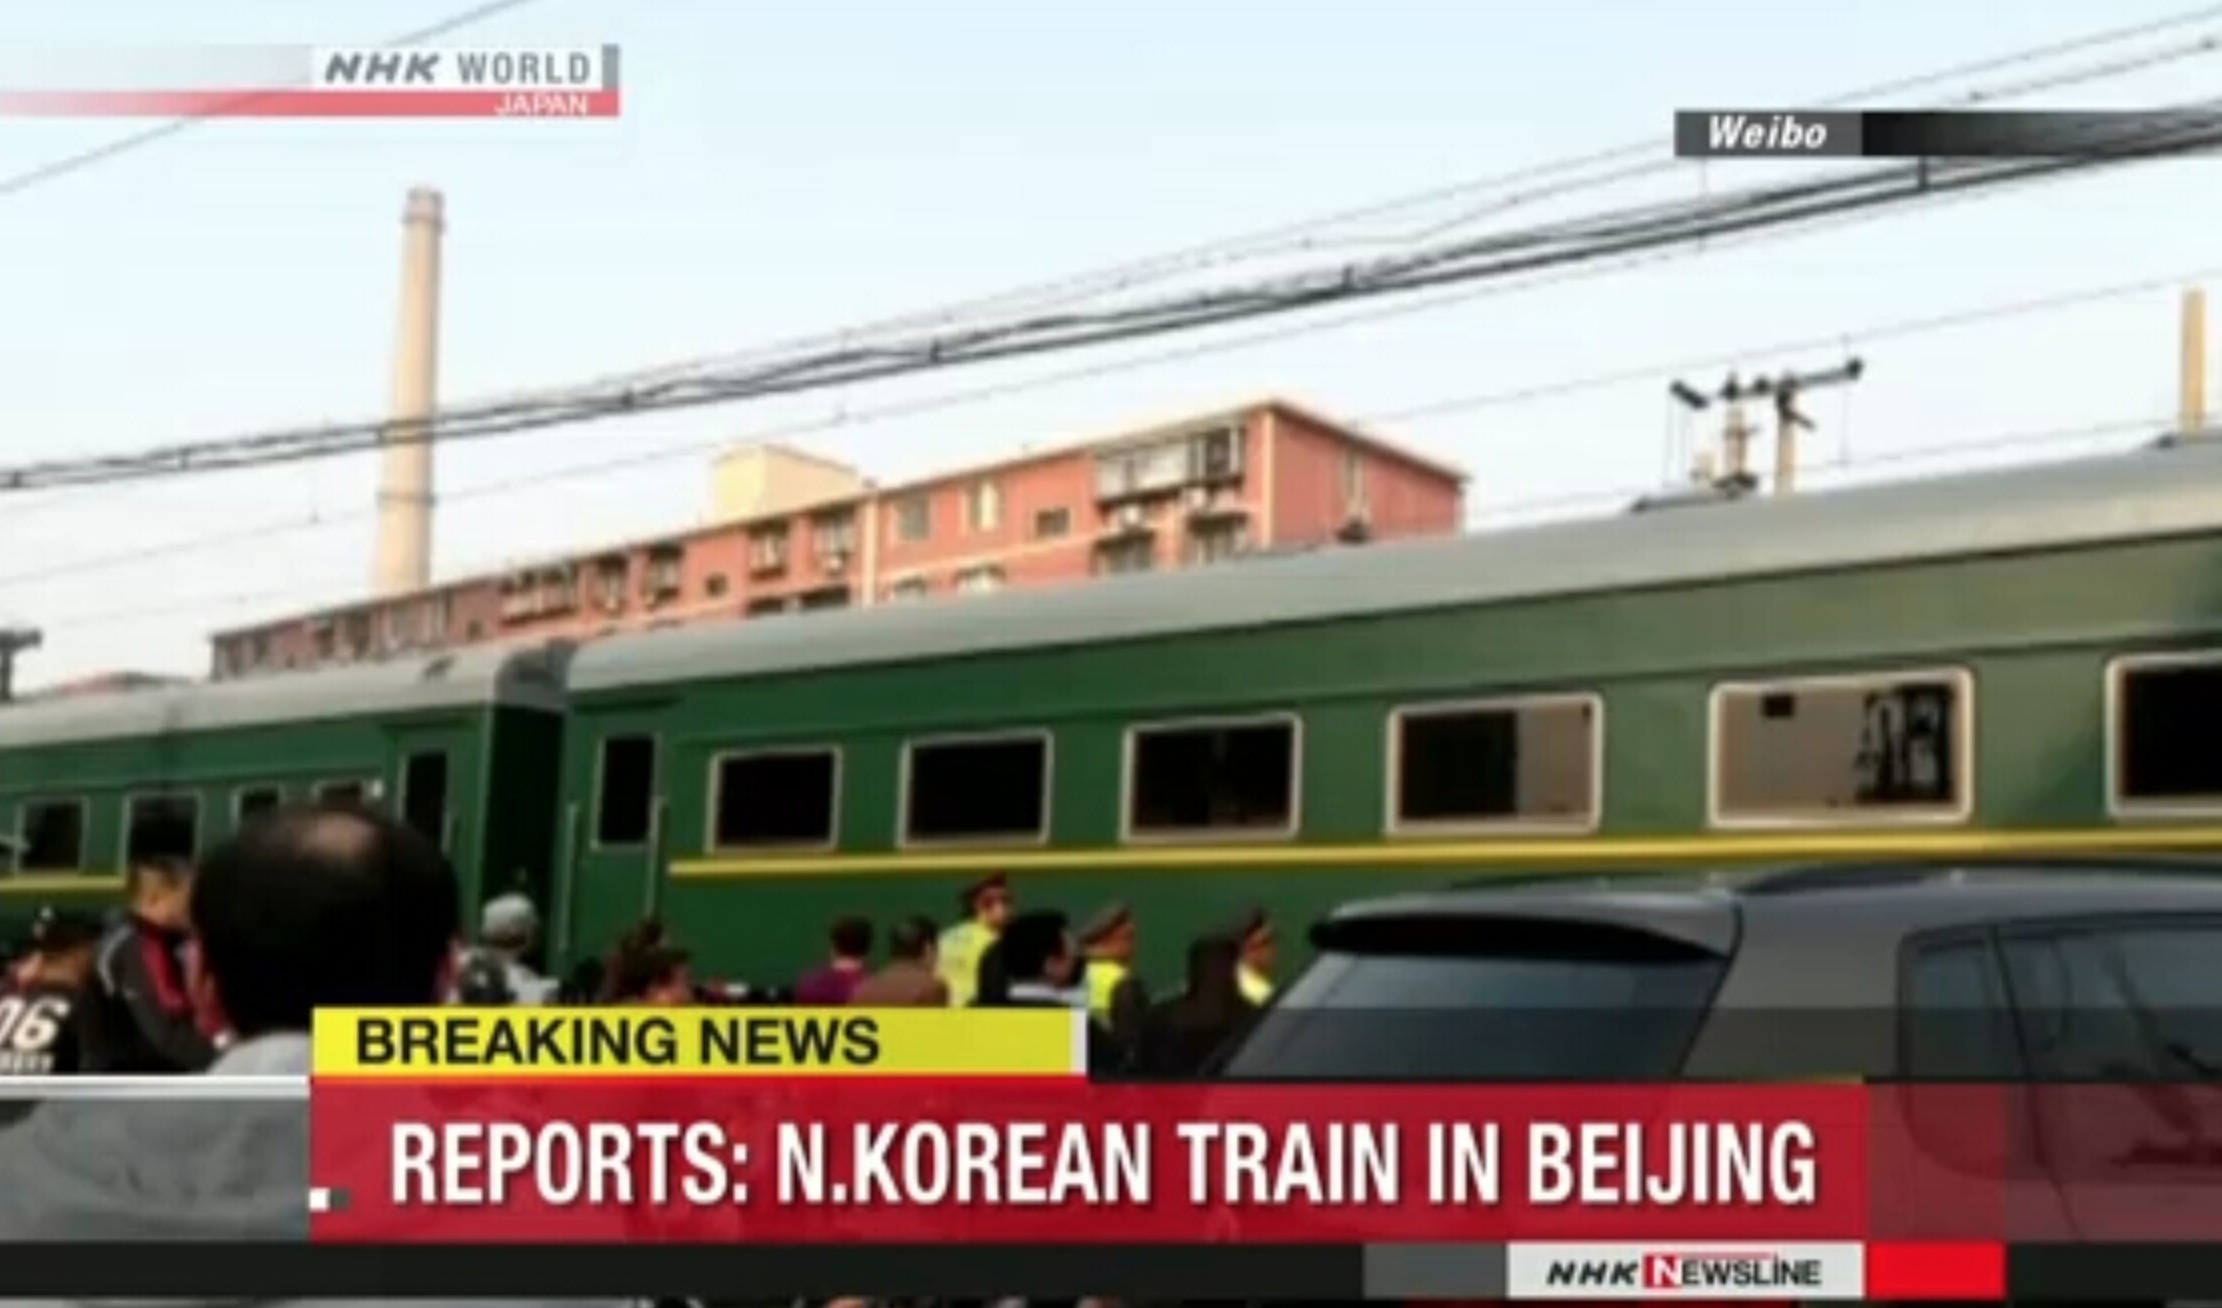 North Korean leader Kim Jong-un arrives on train in Beijing under heavy guard, report says The Independent The Independent